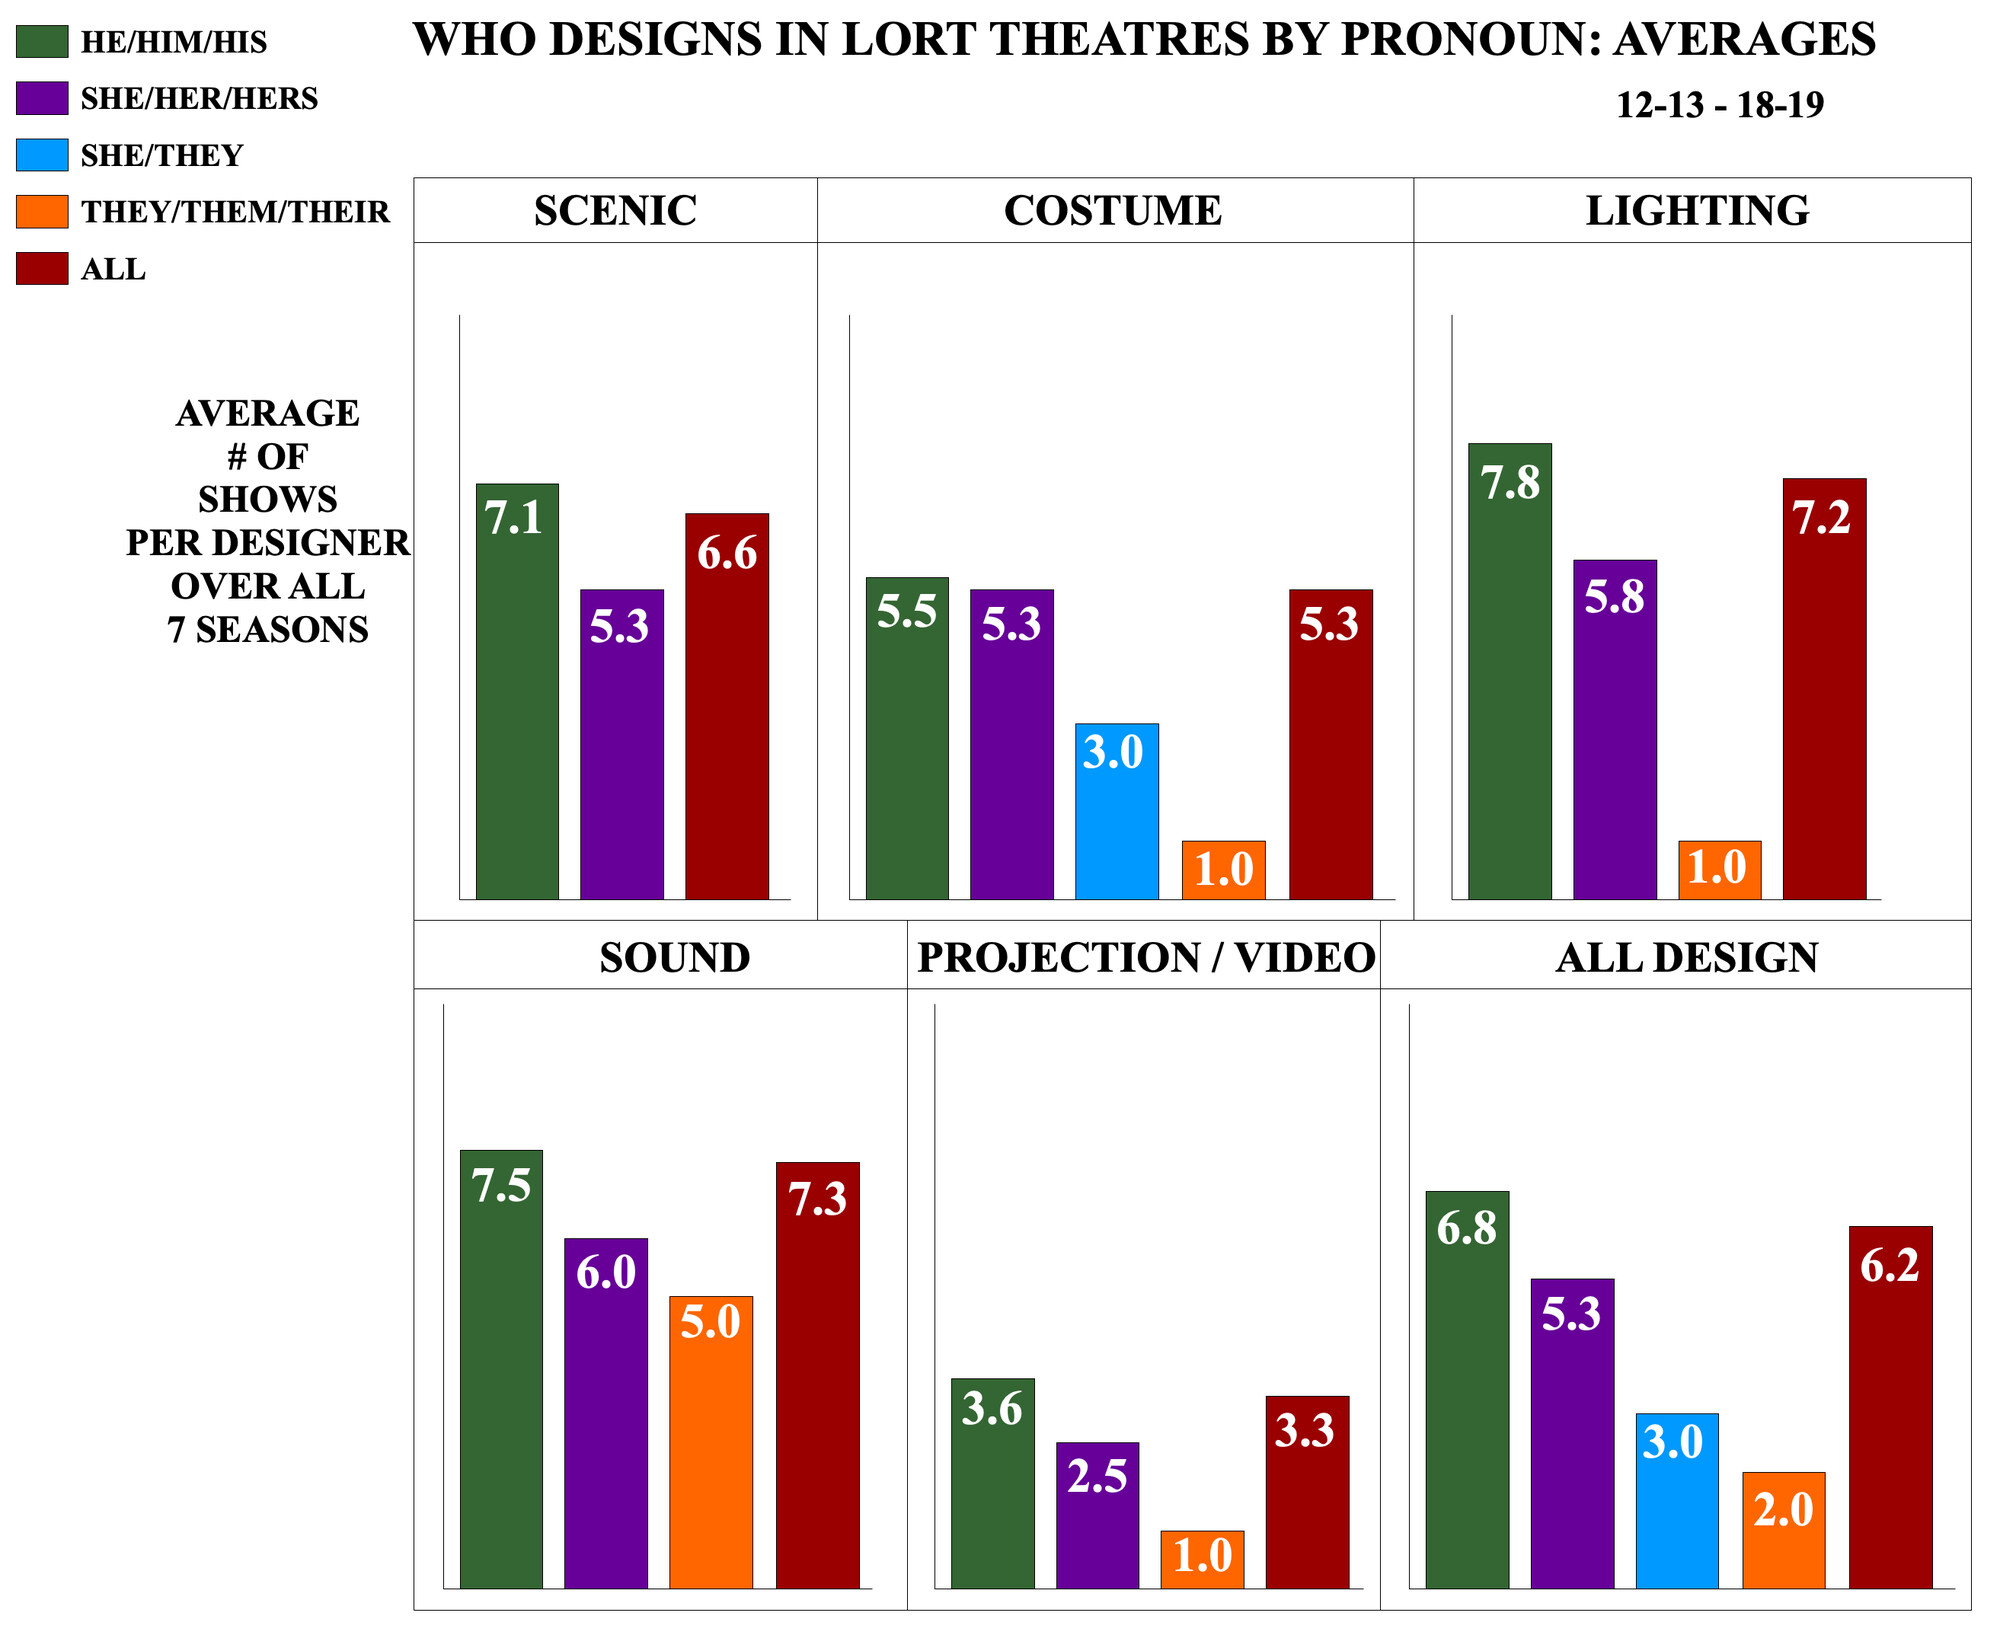 Who Designs in LORT Theatres by Pronoun: Averages